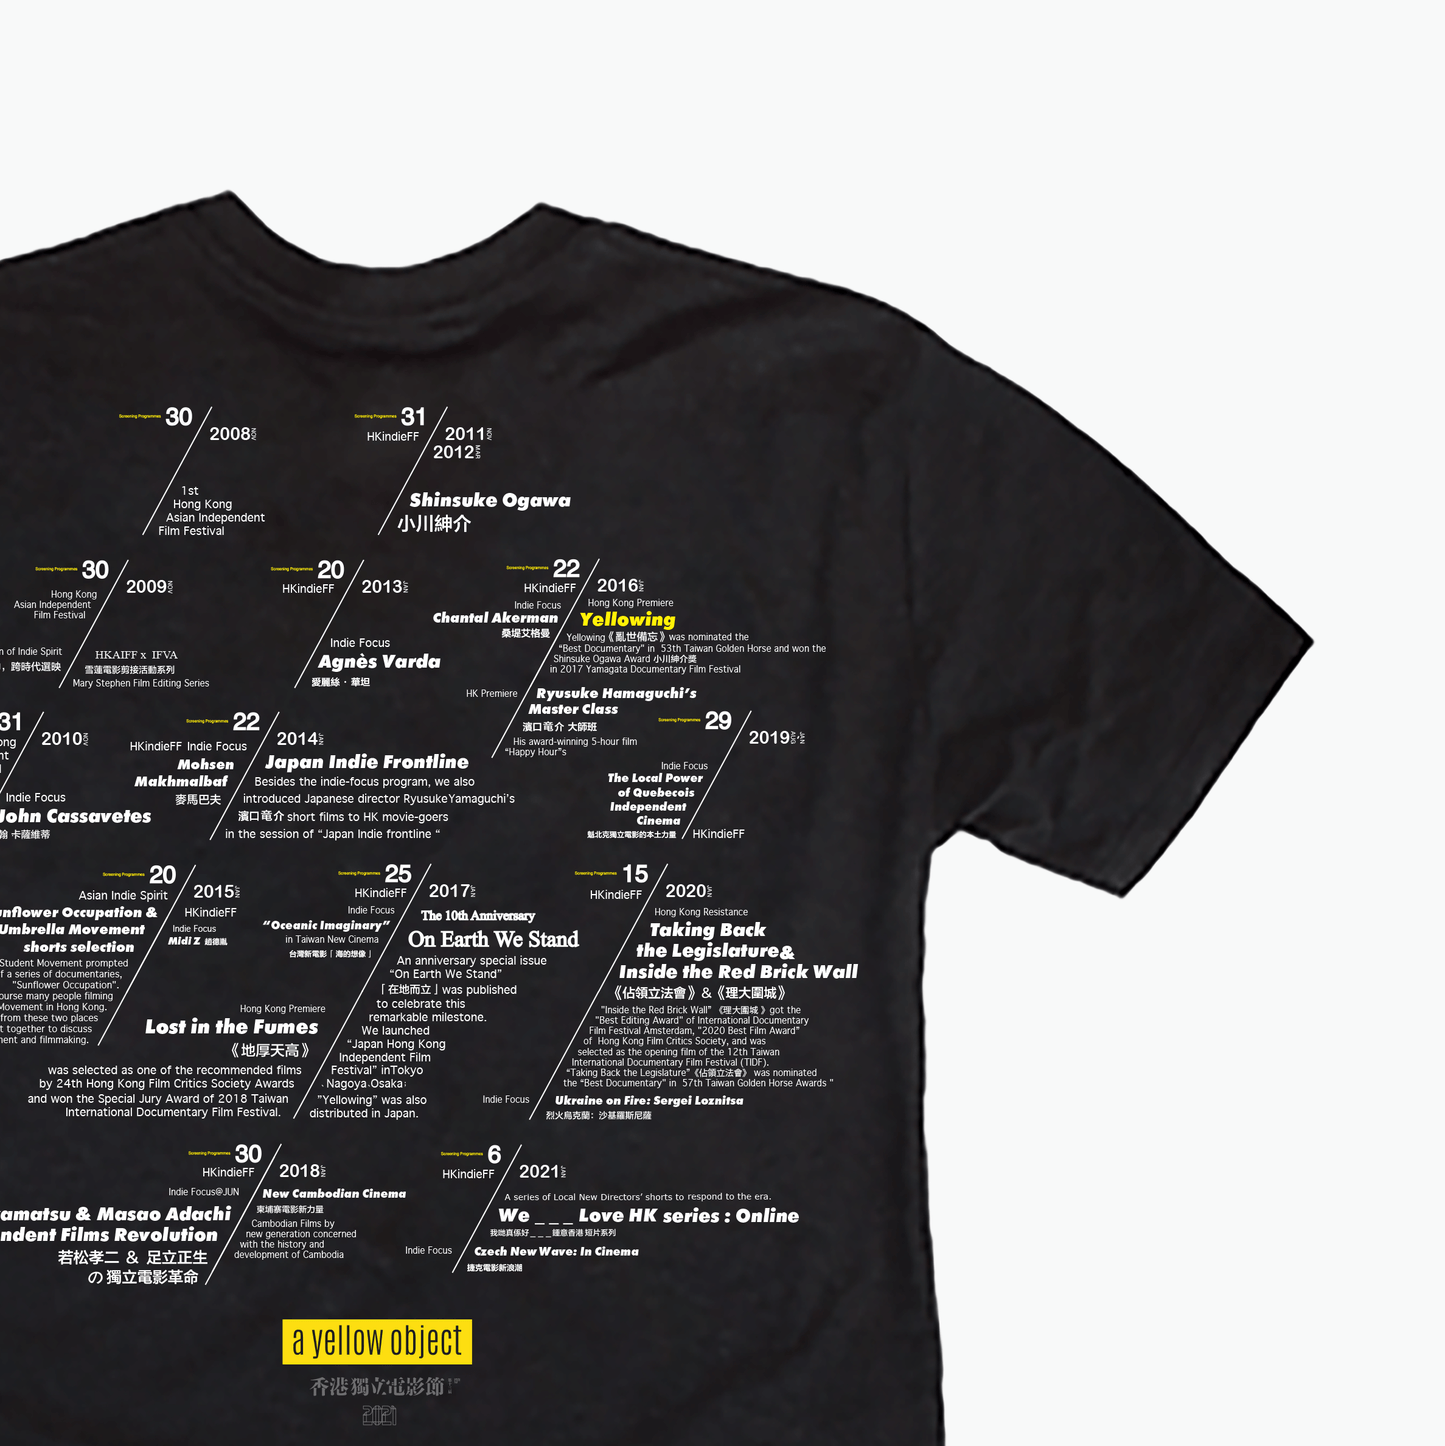 HKINDIEFF Timeline T-Shirt (Black) - A Yellow Object